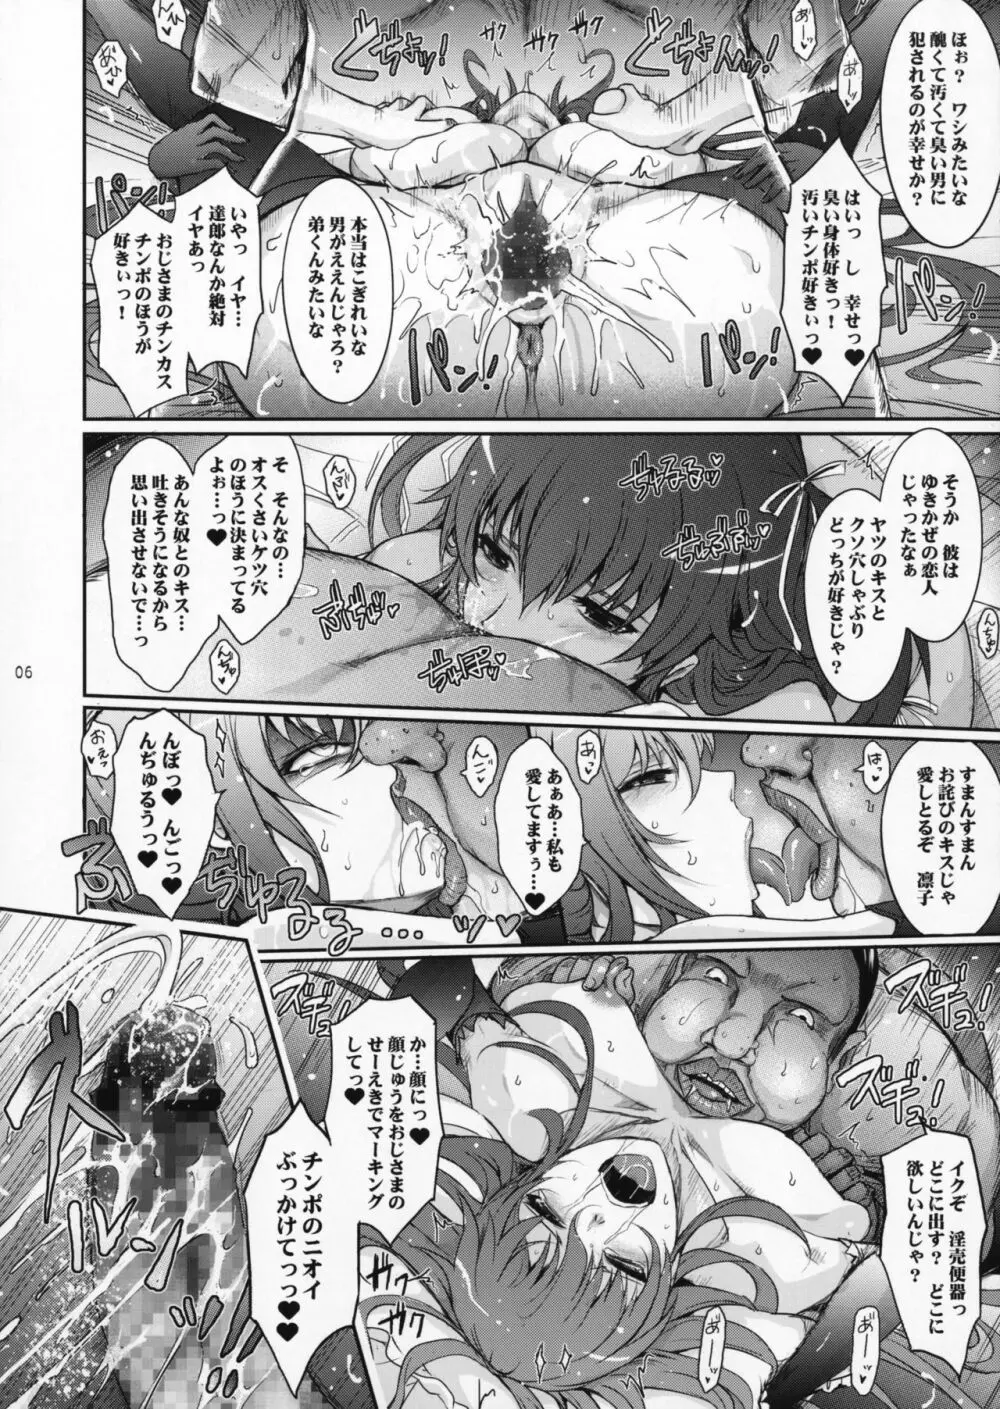 TENTACLES 隷嬢秋山凛子の蜜箱 - page5